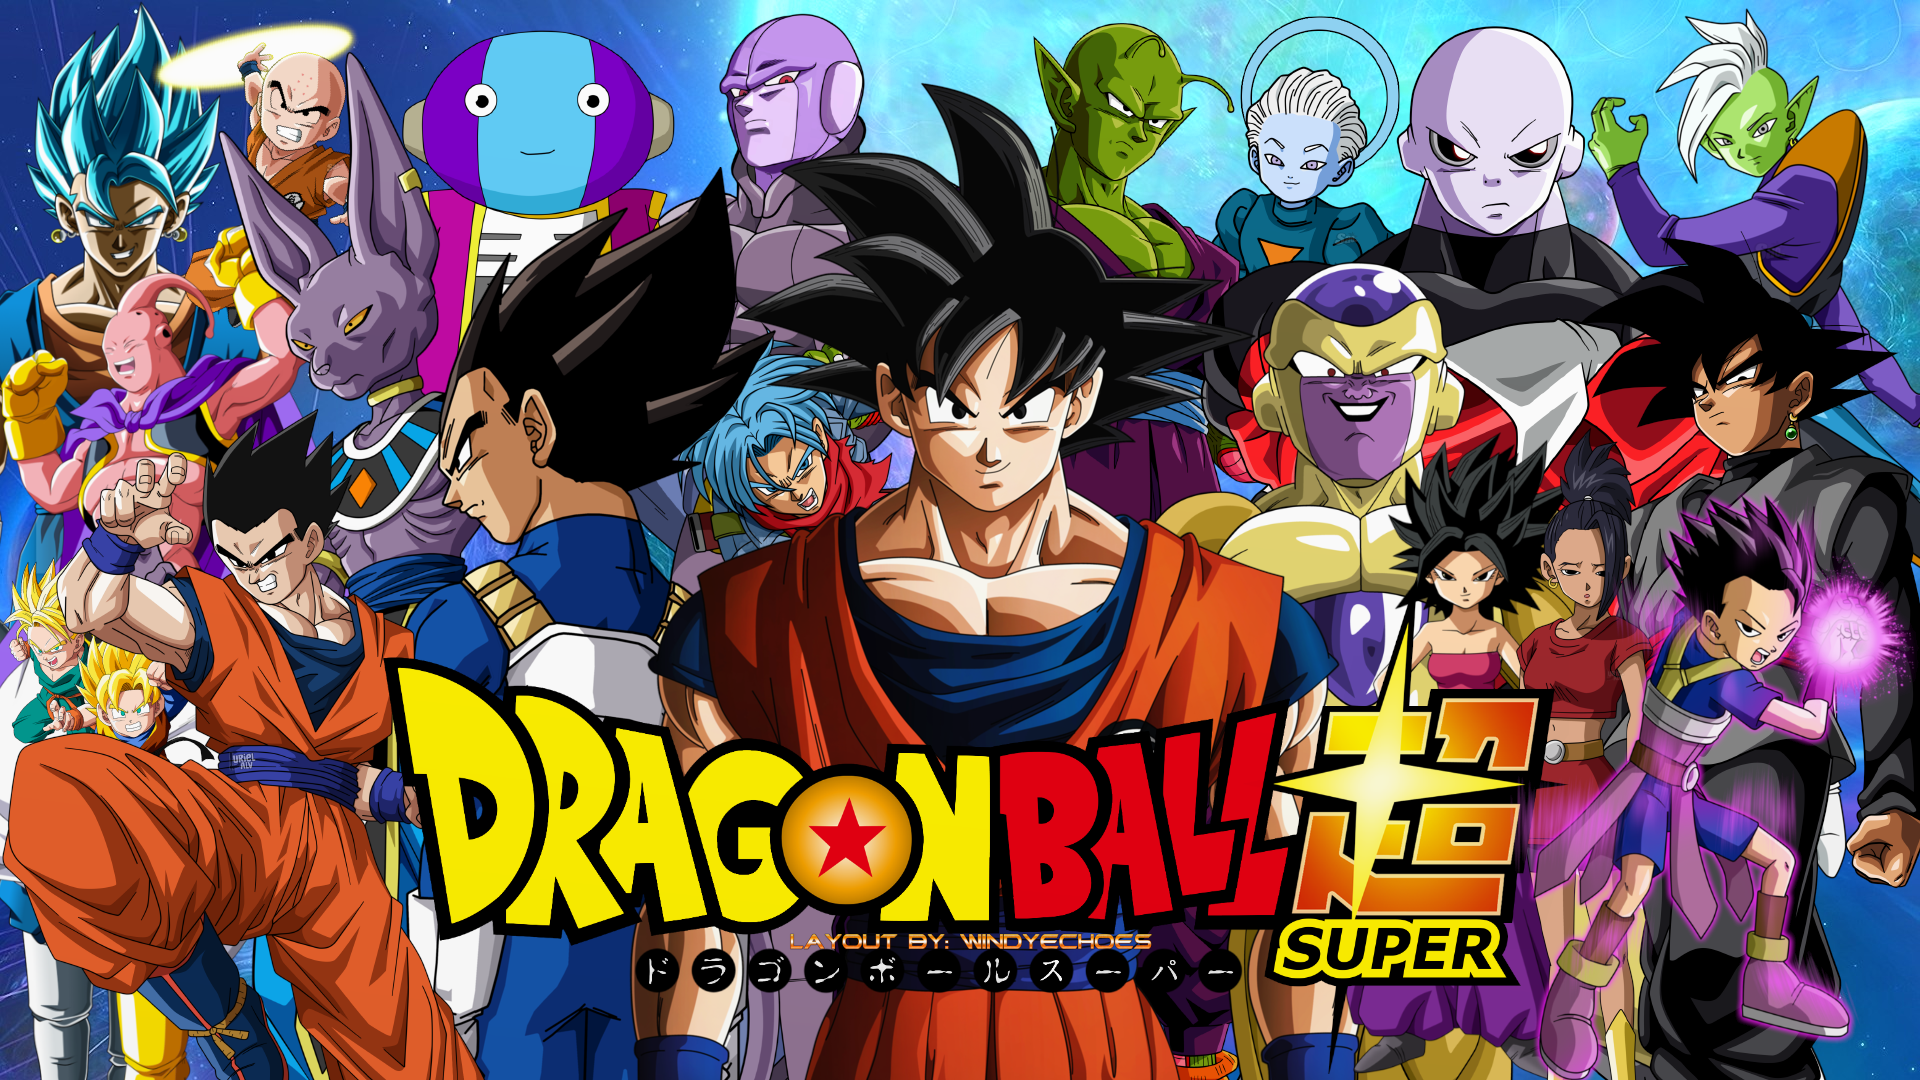 10 Top Dragon Ball Super Wall Paper FULL HD 1080p For PC Desktop  Dragon  ball super wallpapers, Dragon ball wallpapers, Dragon ball super